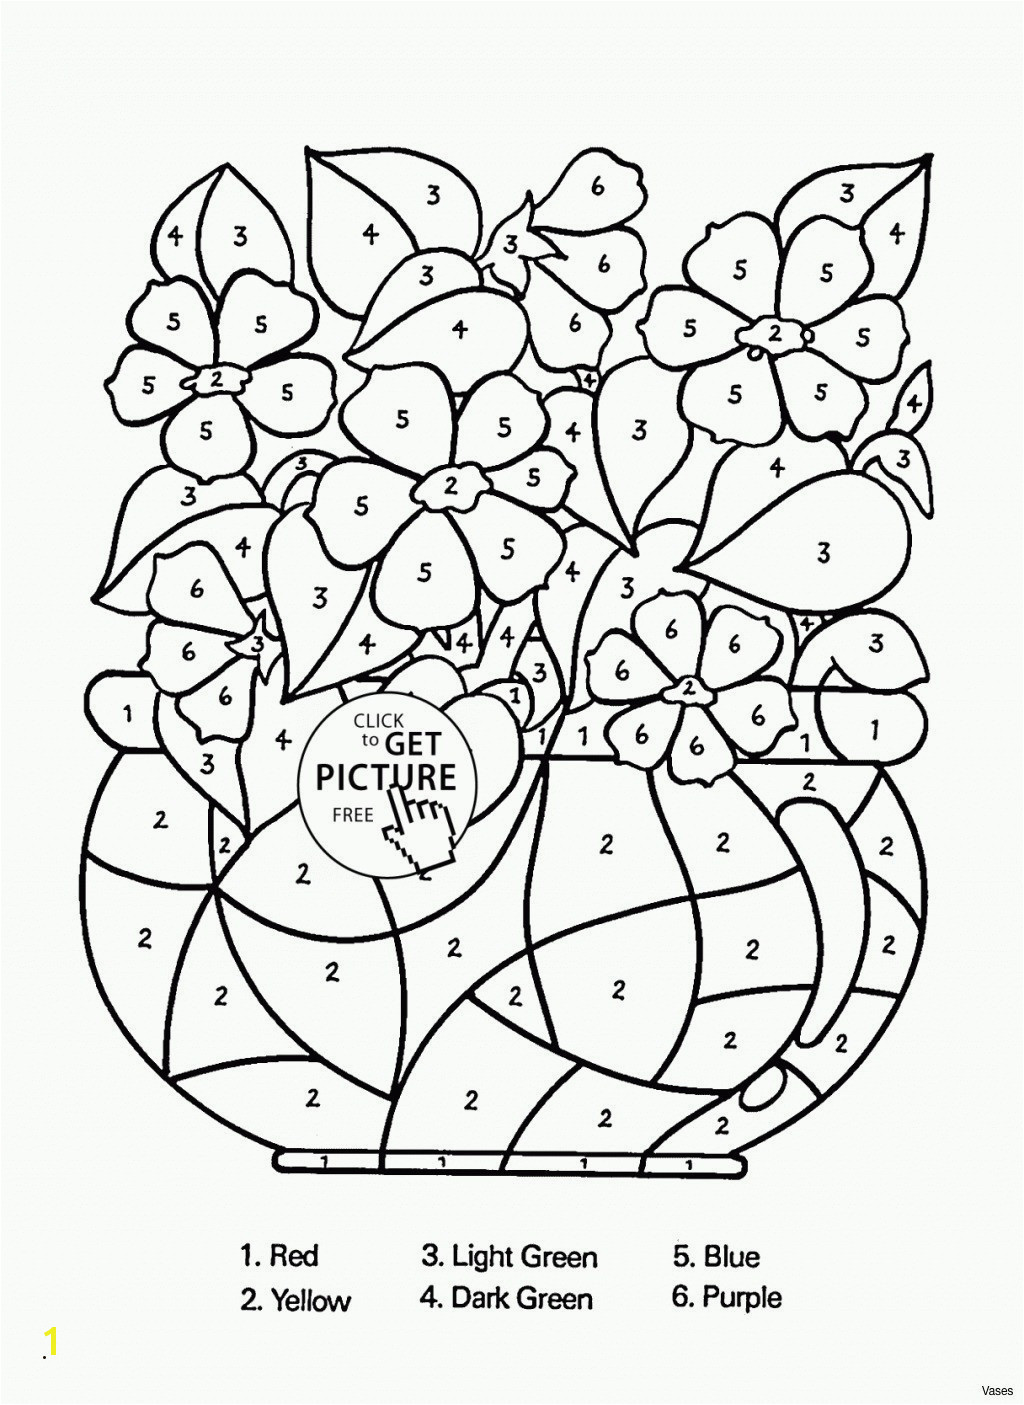 C is for Car Coloring Page Saved Free Coloring Pages Dwarves Snow White Genial Ausmalbilder